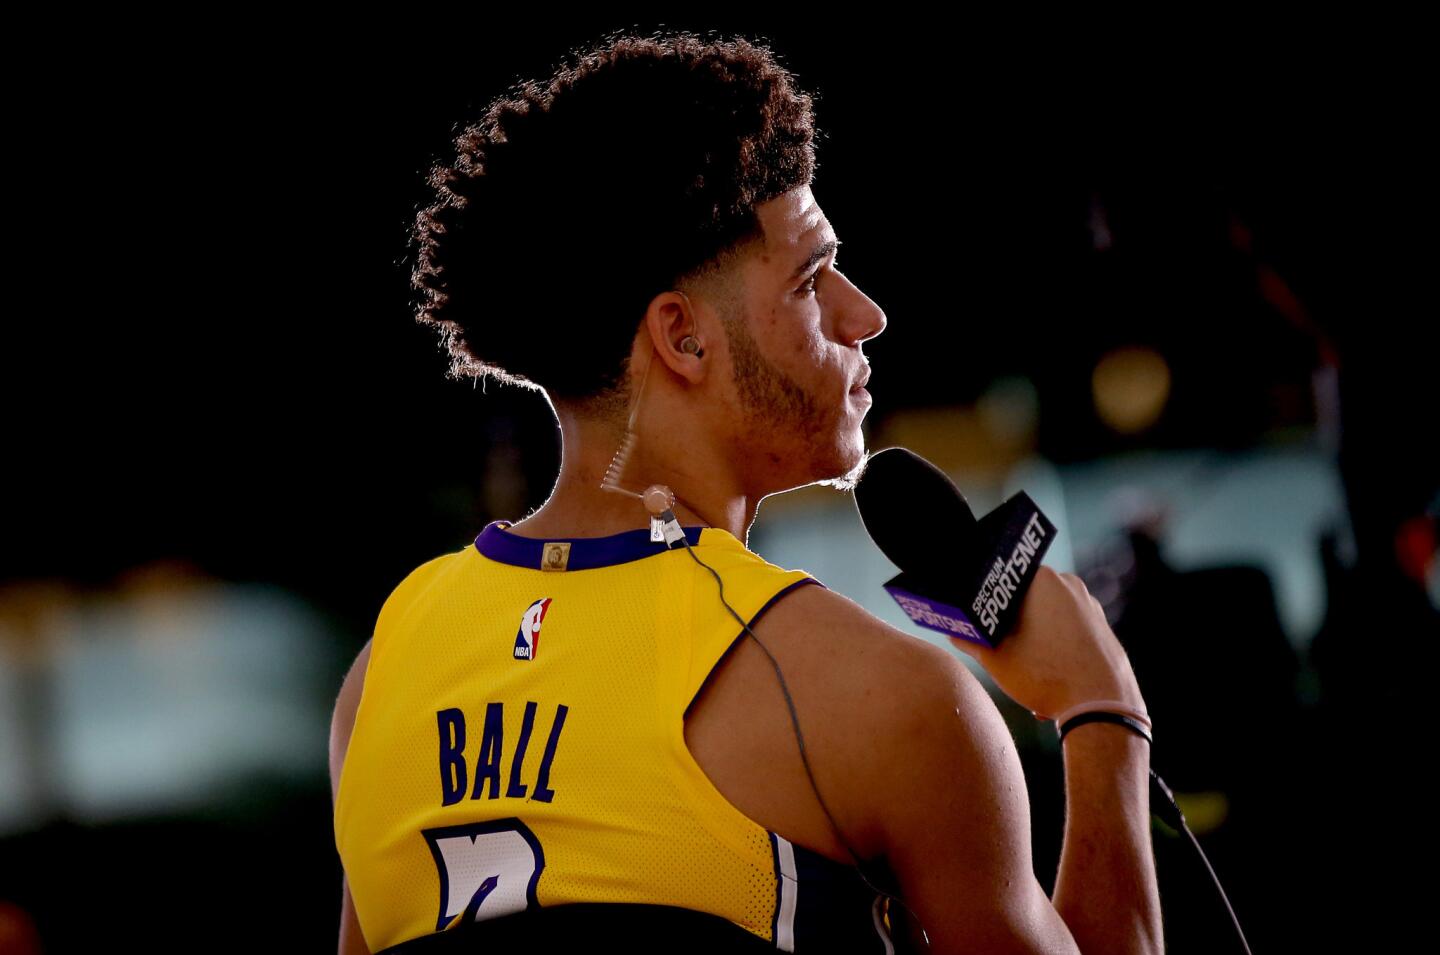 Lakers rookie point guard Lonzo Ball talks with reporters during media day activities at the team's new training facility in El Segundo on Sept. 25.